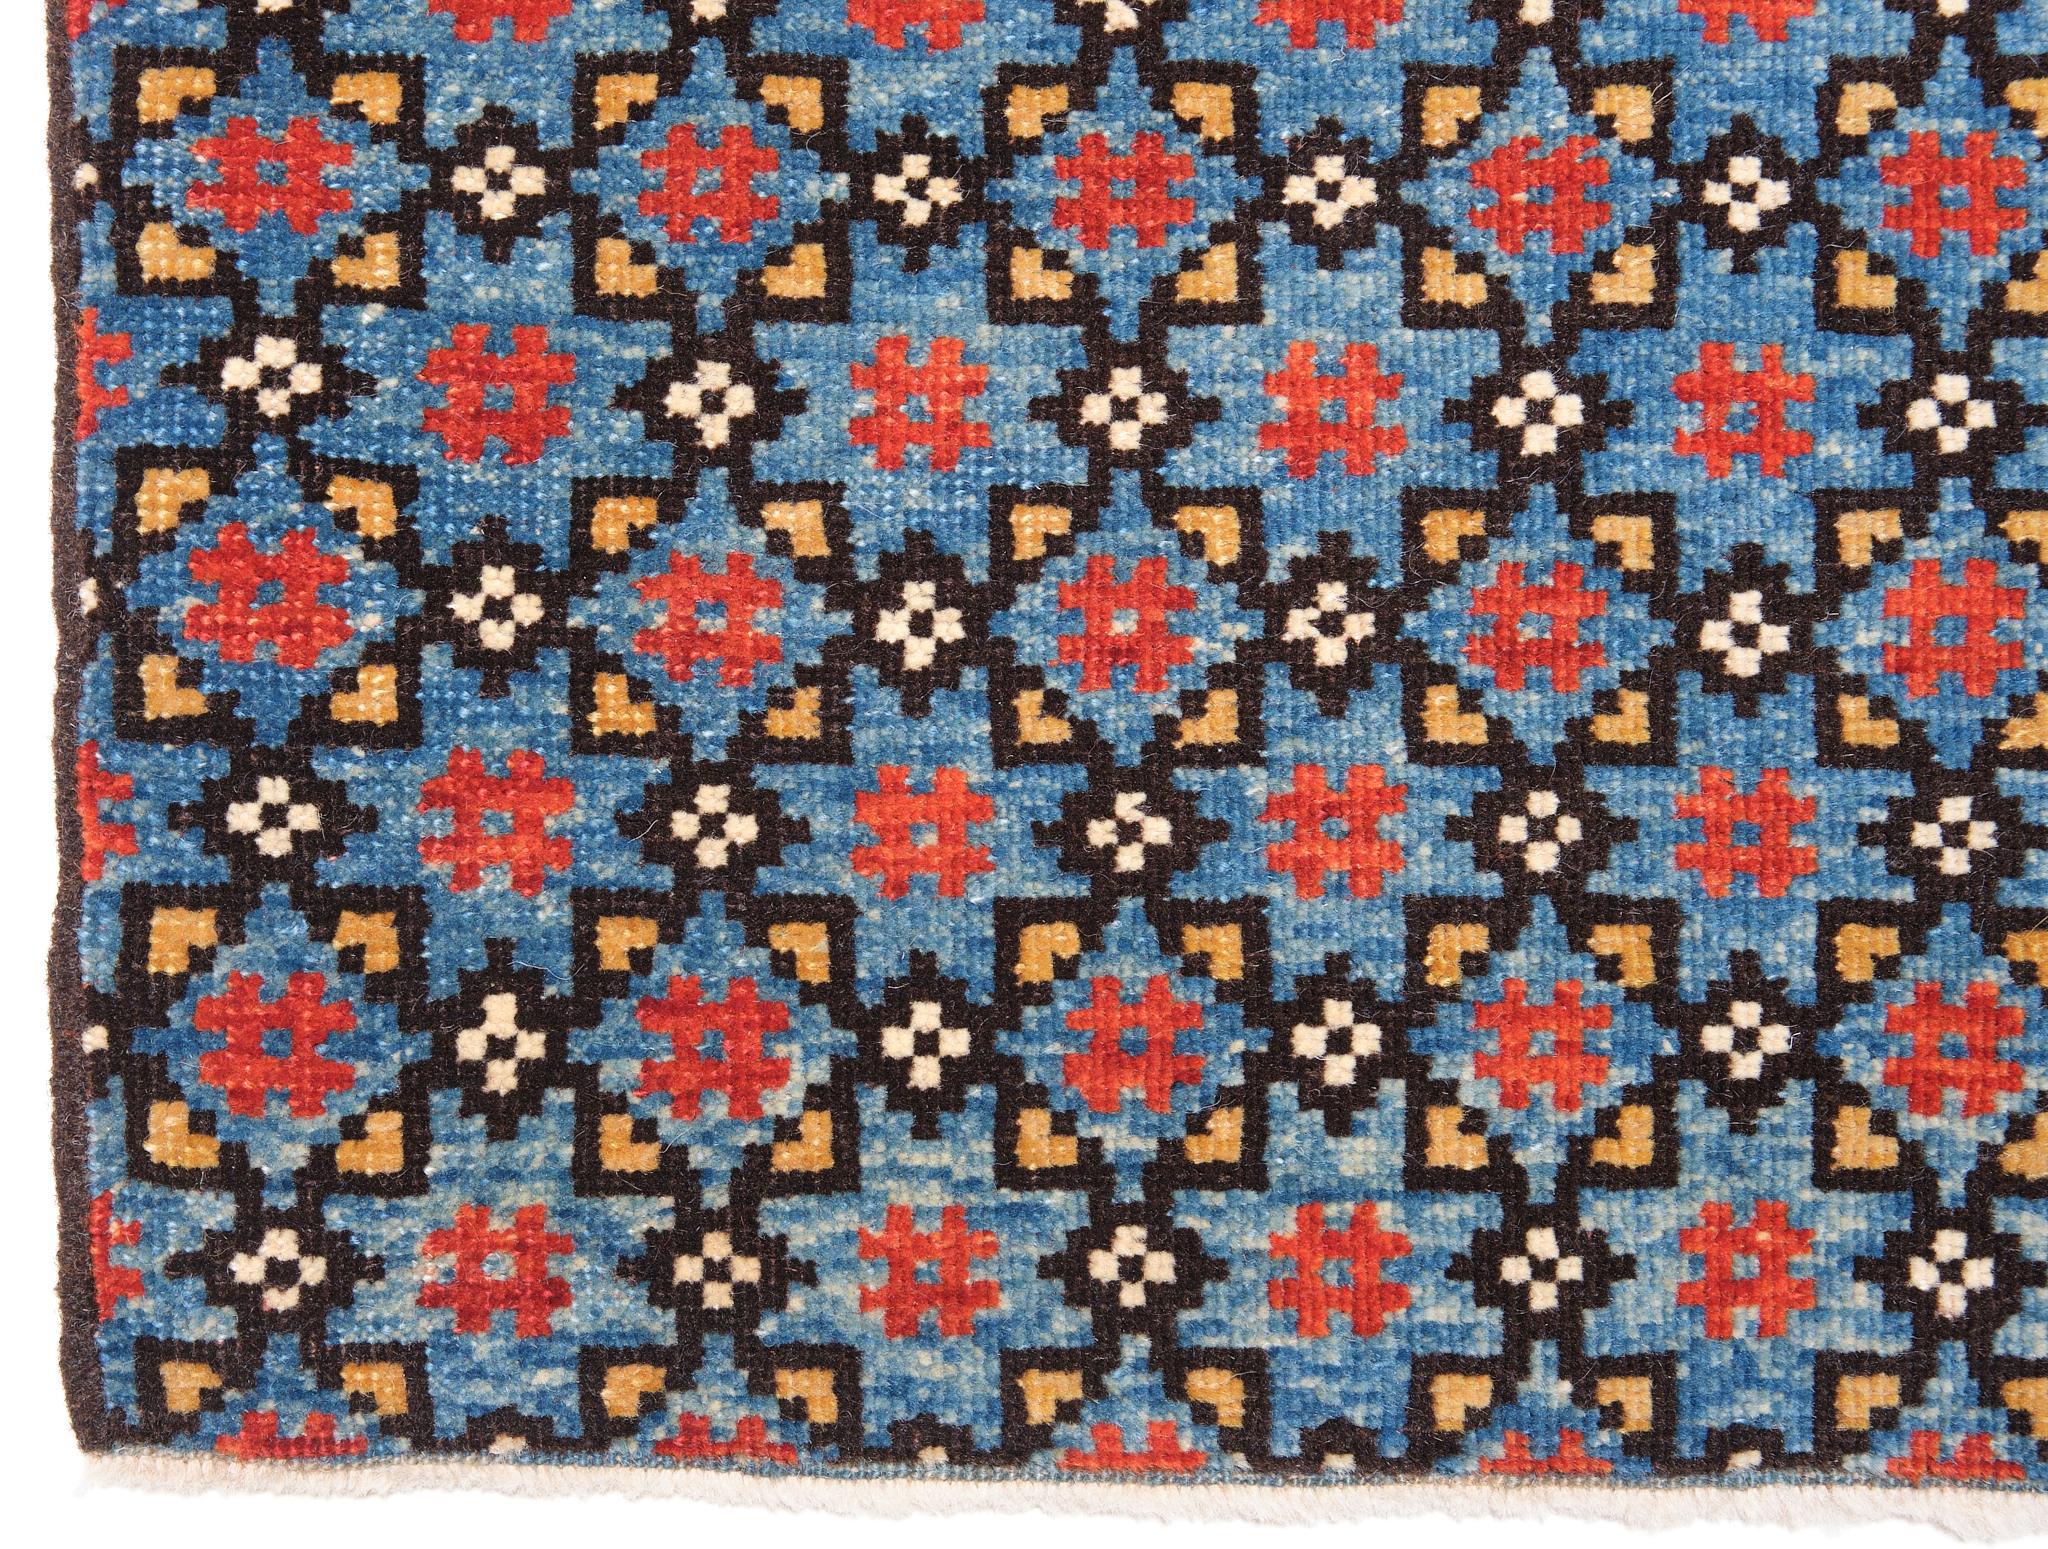 The source of the carpet comes from the book Turkish Carpets from the 13th – 18th centuries, Ahmet Ertug, 1996 pl.16. This 15th-century carpet is from Ulu Mosque, Divrigi Sivas region, central Anatolia. The Seljuk period marks one of the highest